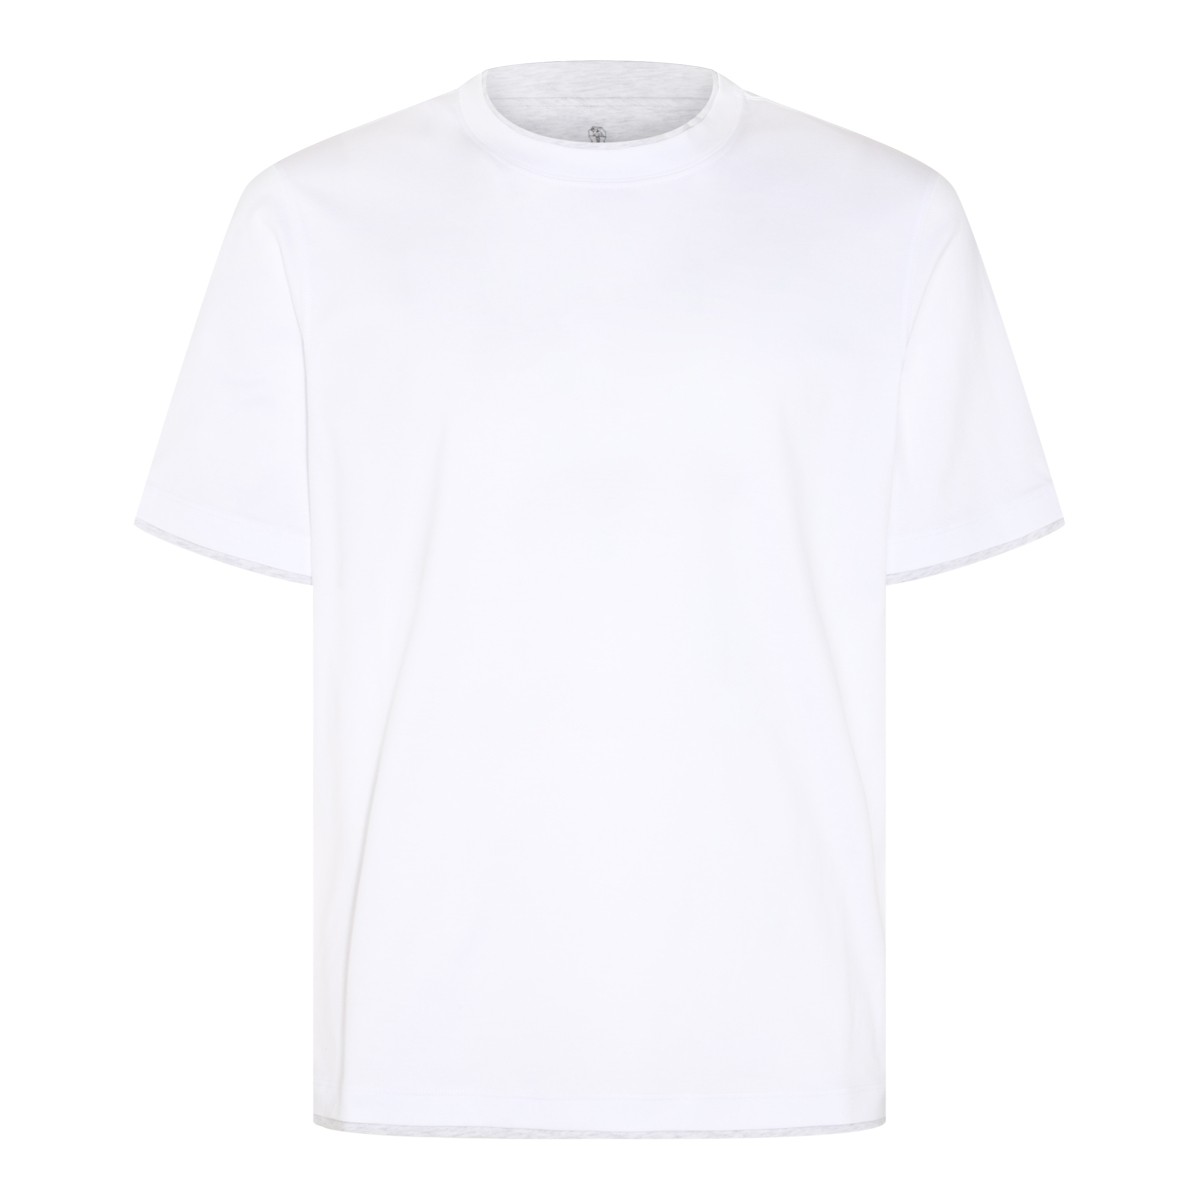 WHITE AND LIGHT GREY COTTON T-SHIRT